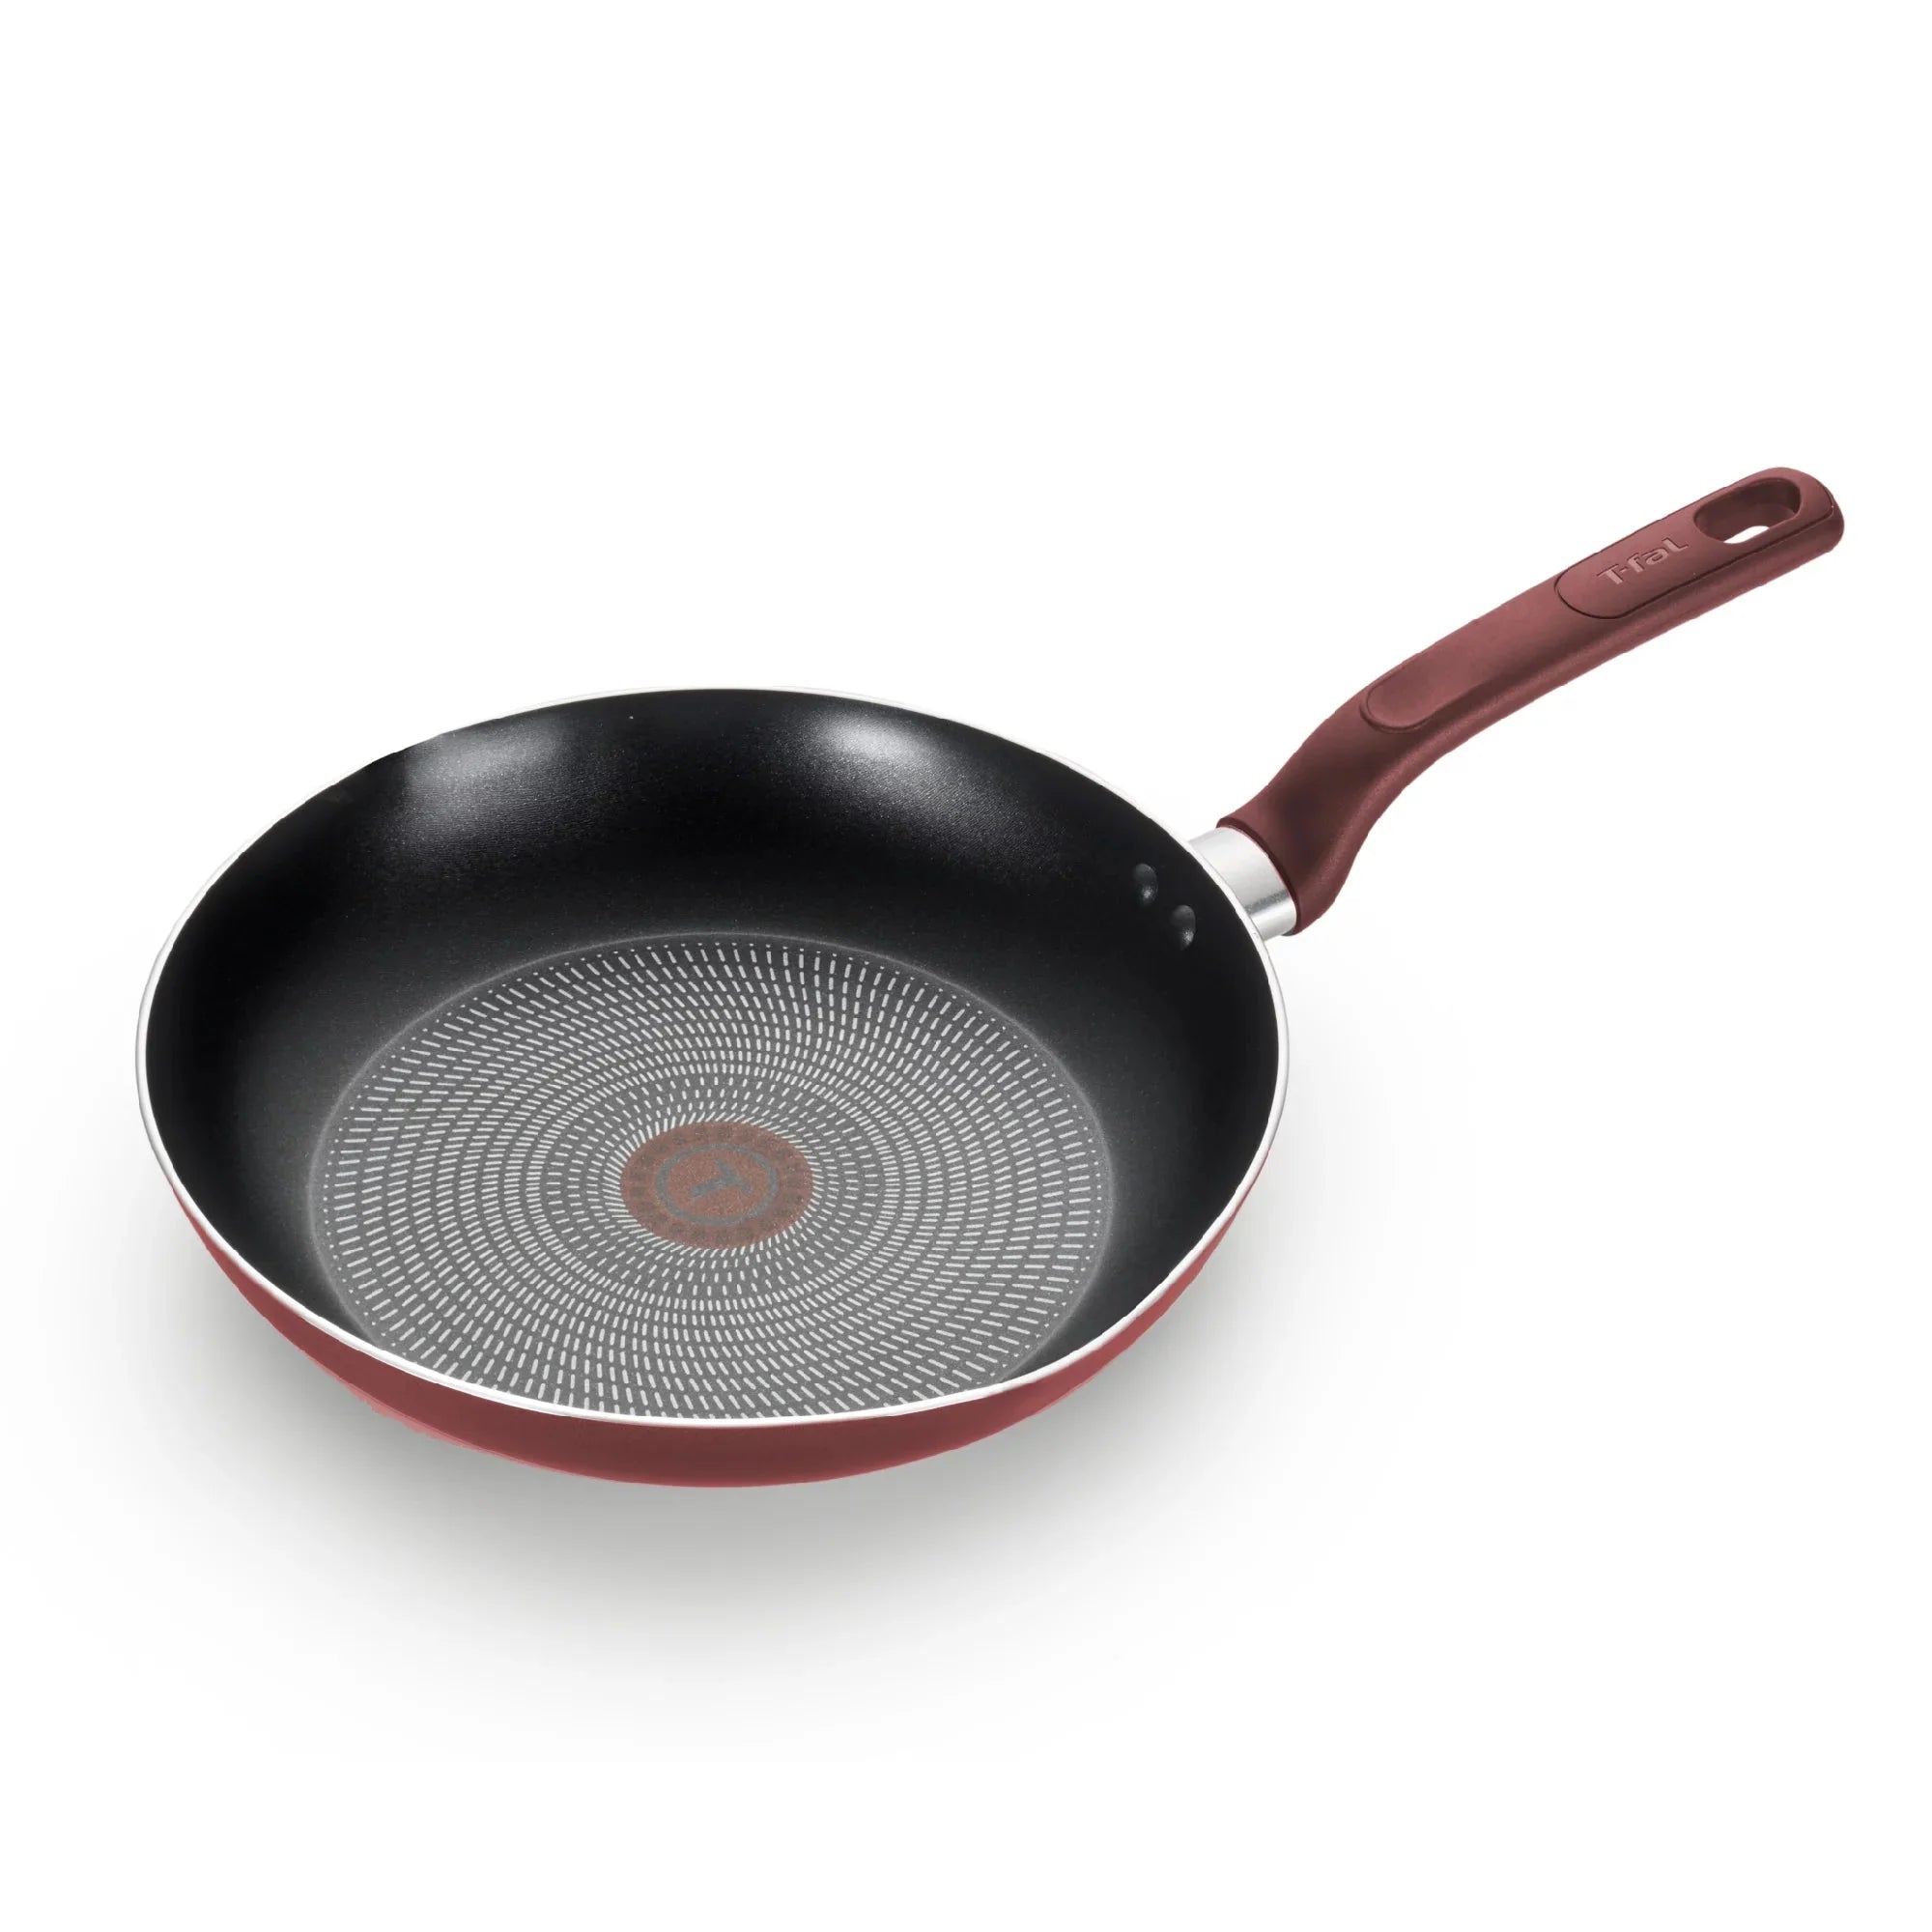 Wholesale prices with free shipping all over United States T-fal Easy Care Nonstick Fry Pan, 12 inch, Red - Steven Deals